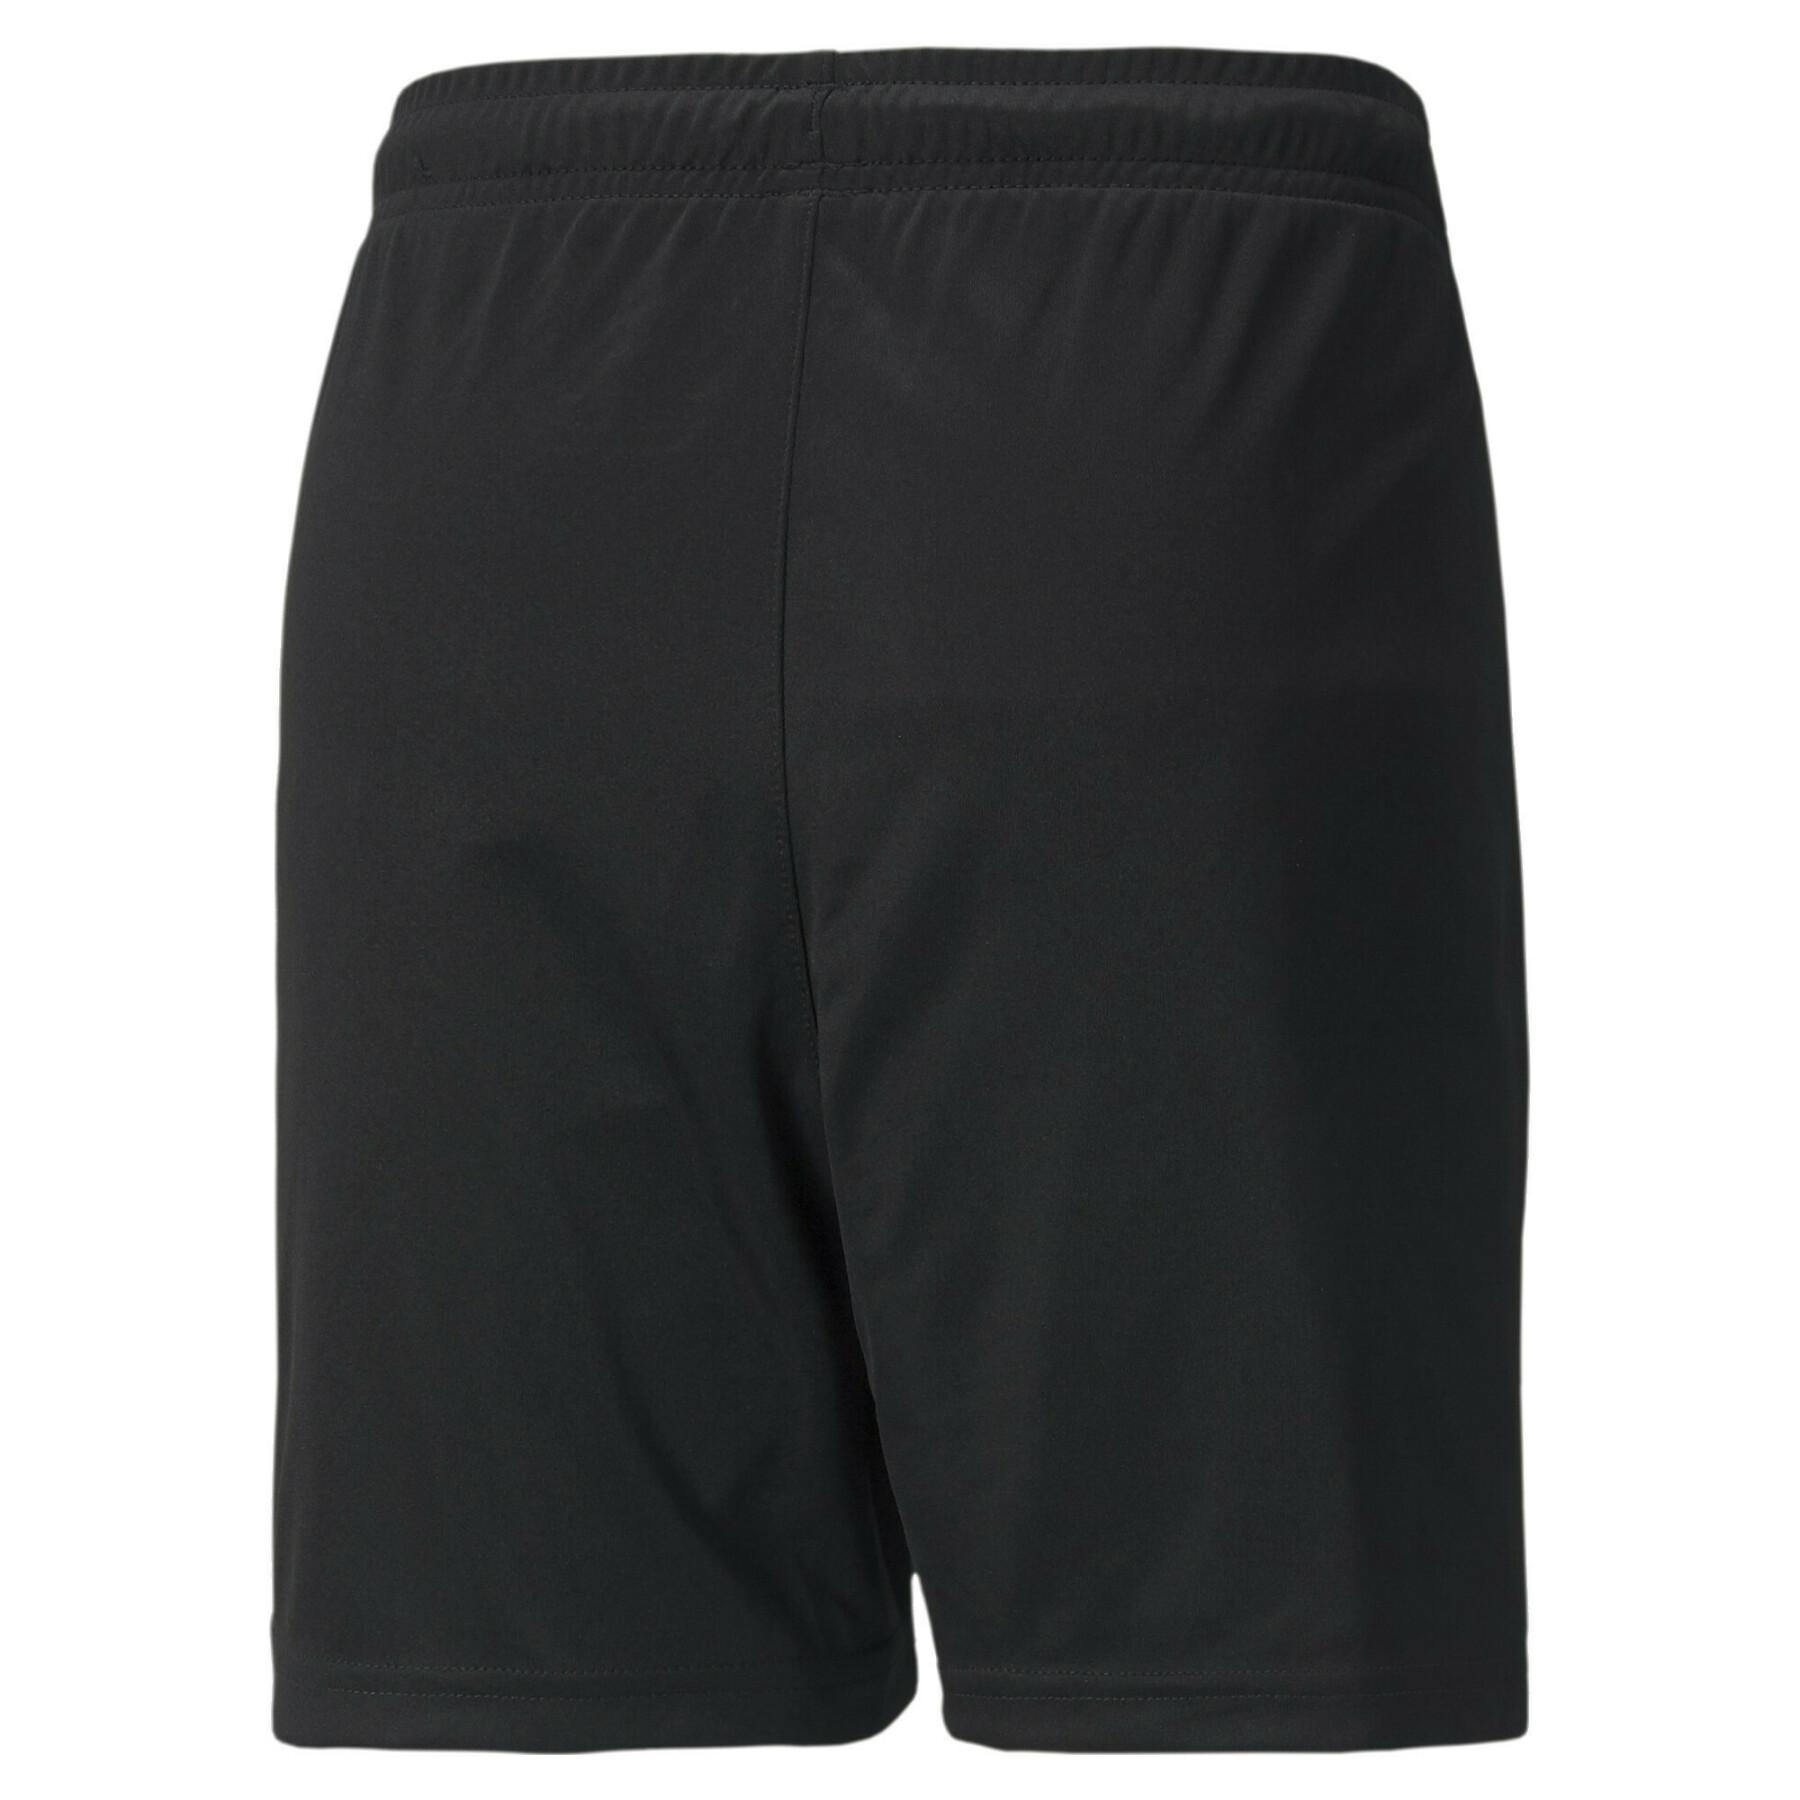 Kindershorts Olympique de Marseille Training with pockets